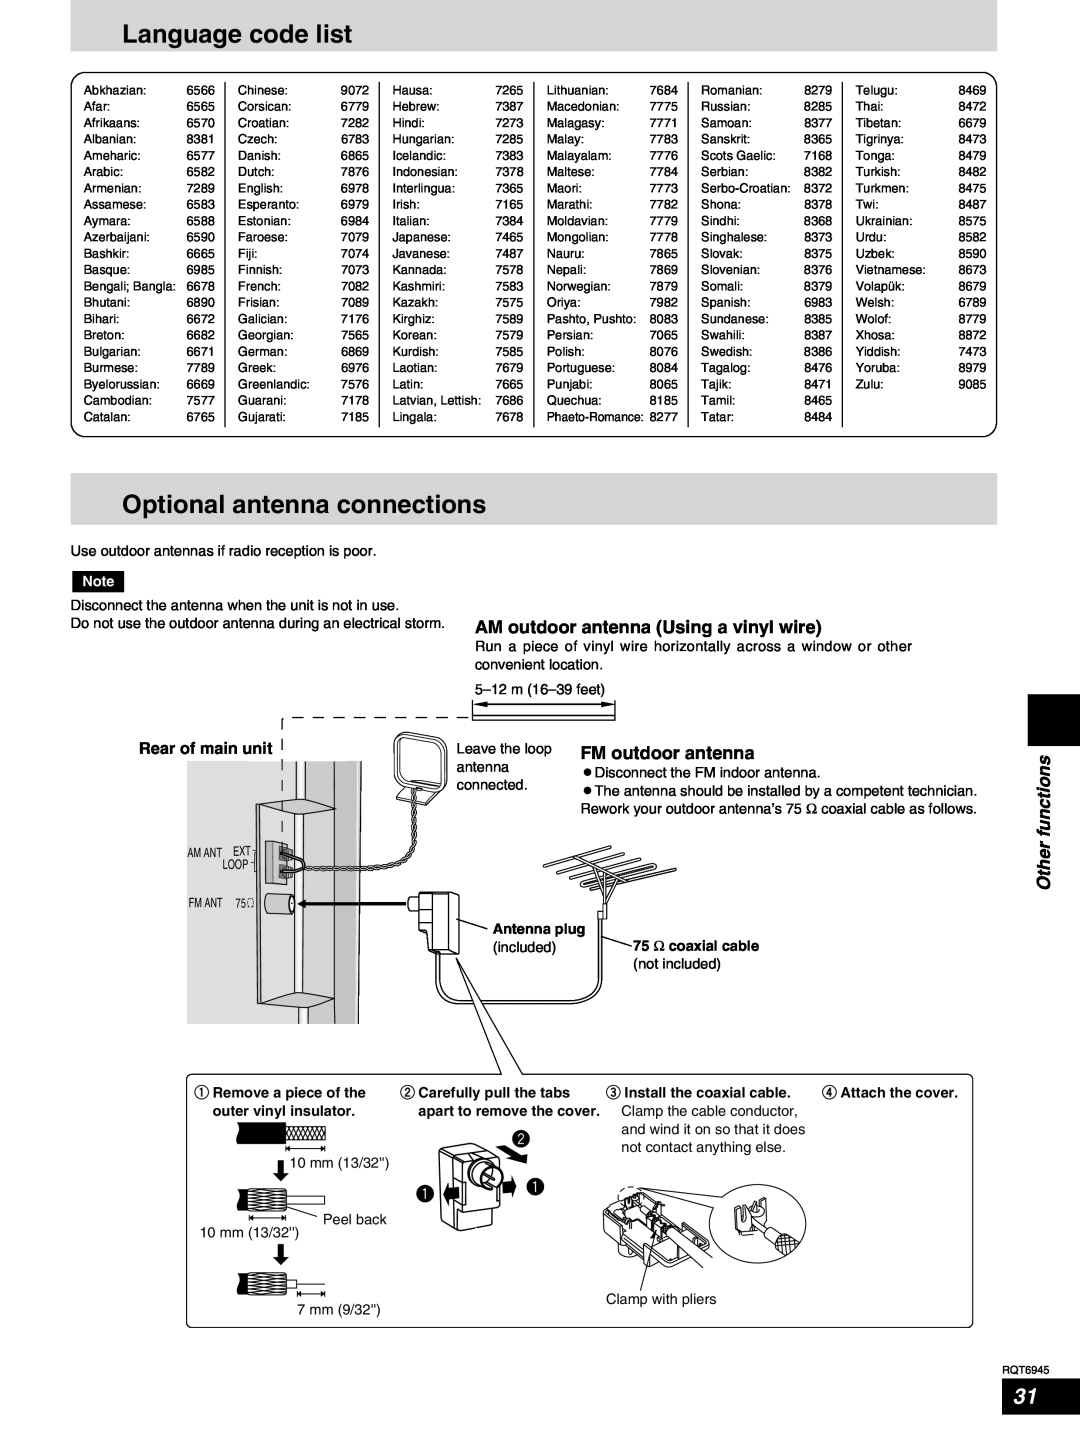 Panasonic SC-ST1 Language code list, Optional antenna connections, AM outdoor antenna Using a vinyl wire, Other functions 